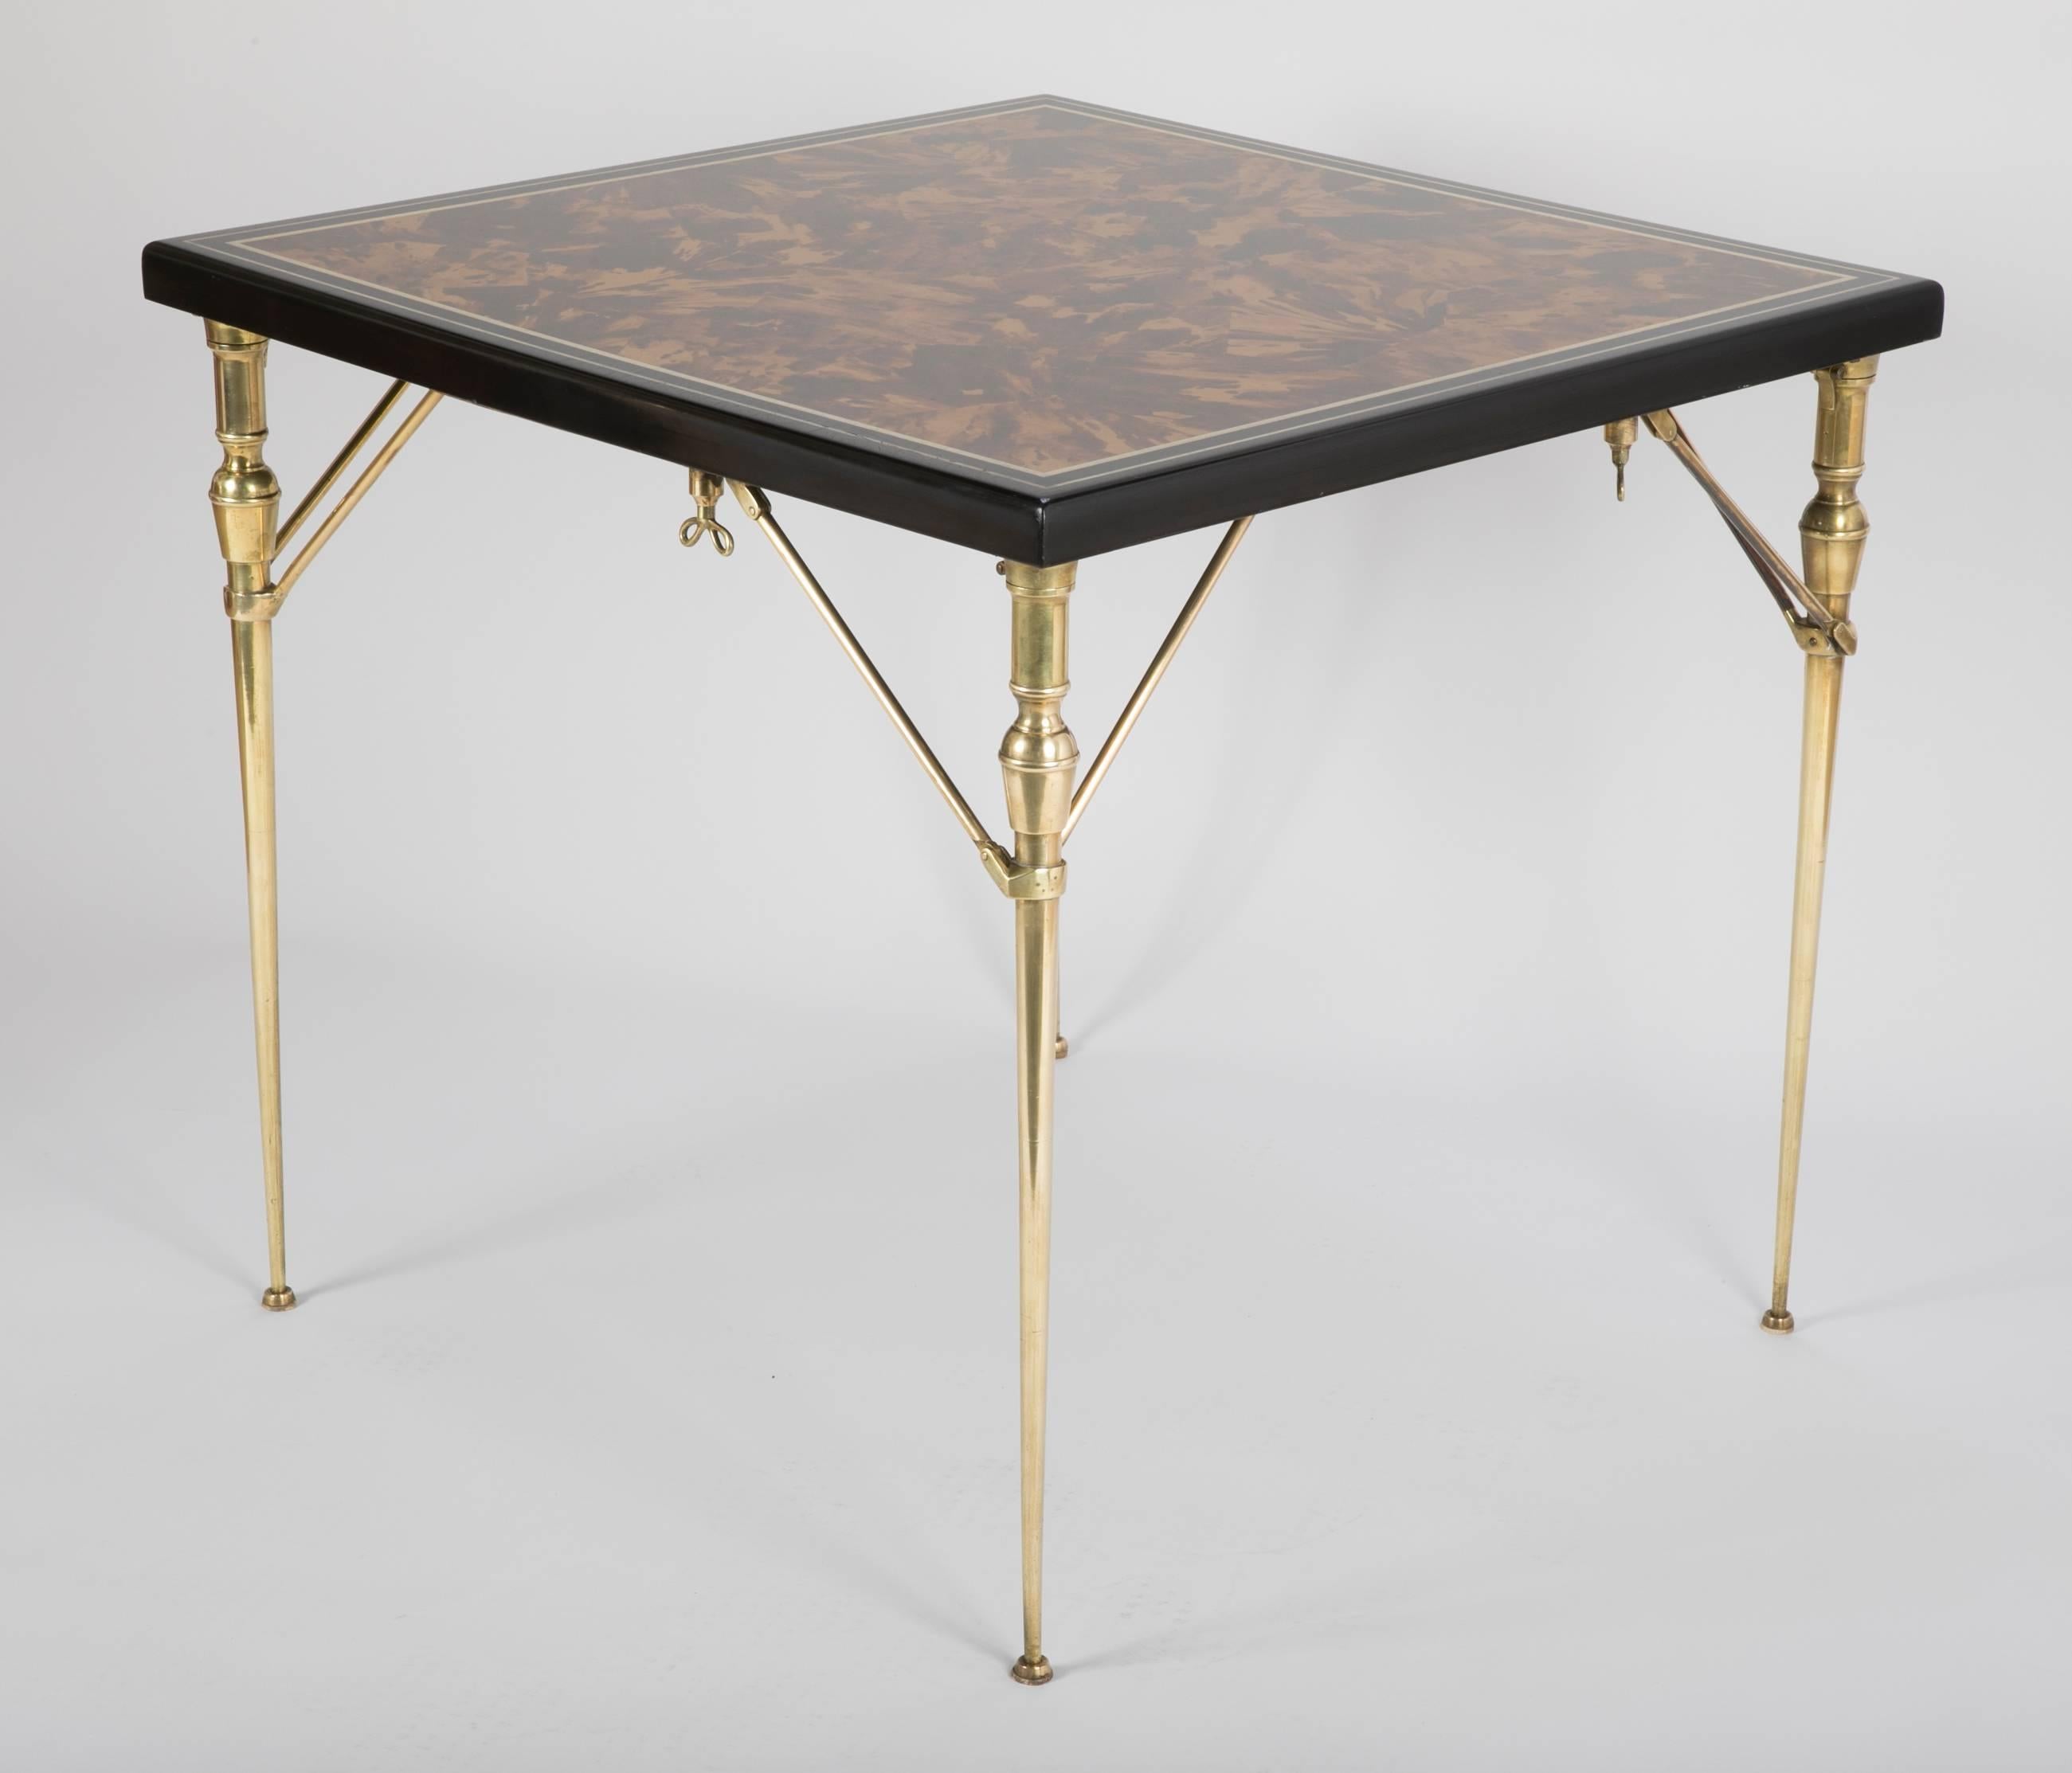 Faux Tortoise Shell Black Lacquer and Gilt Games Table with Bronze Folding Legs 1